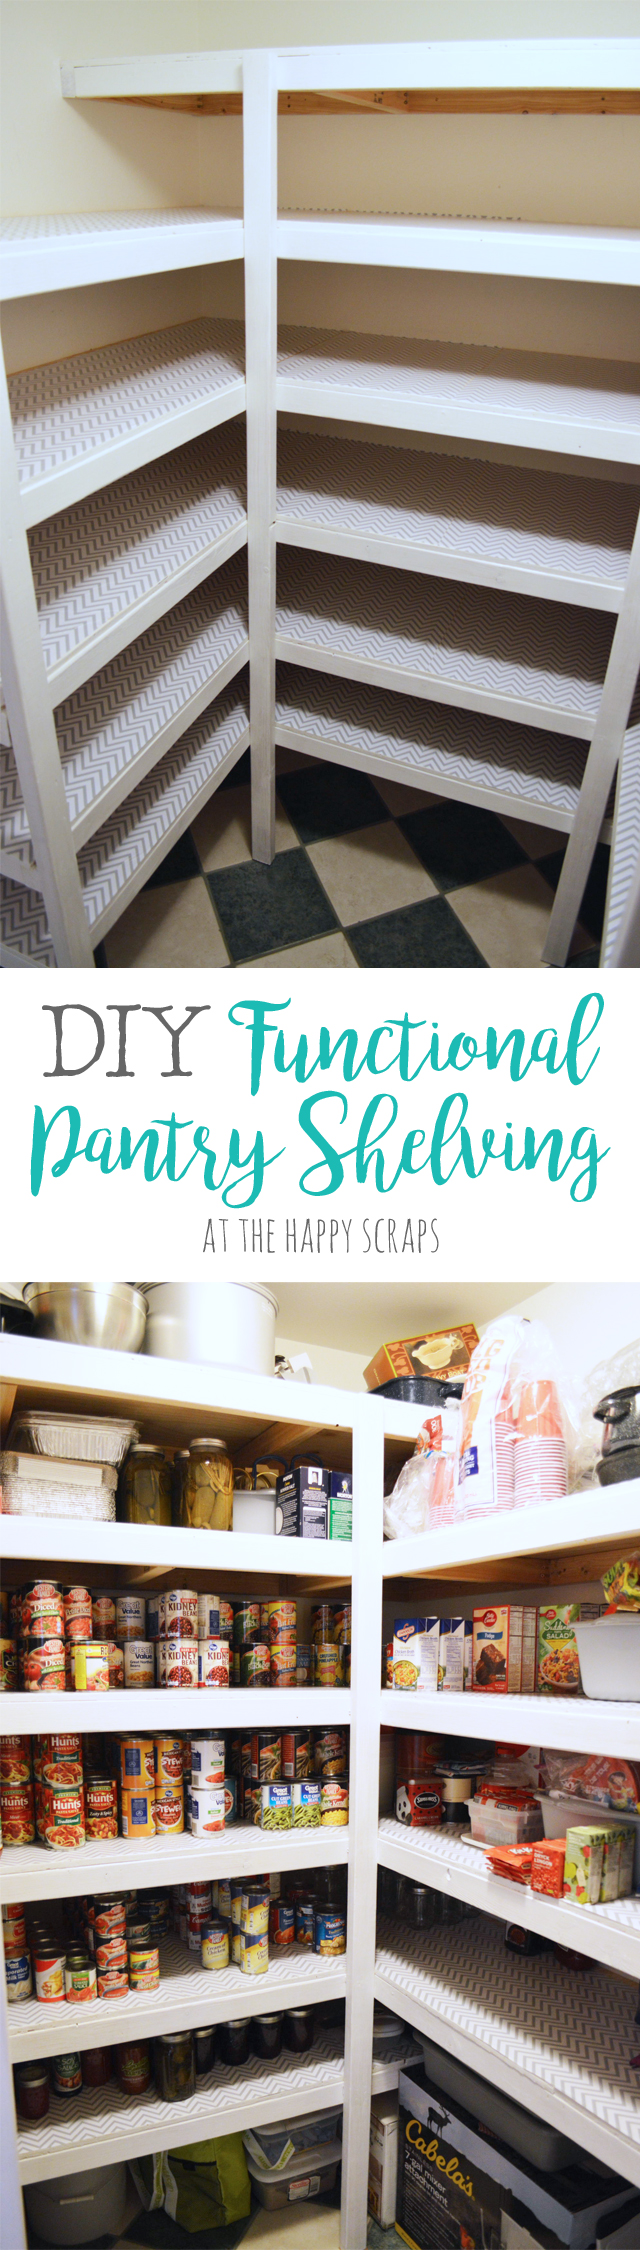 Diy Functional Pantry Shelving The, How To Pantry Shelving